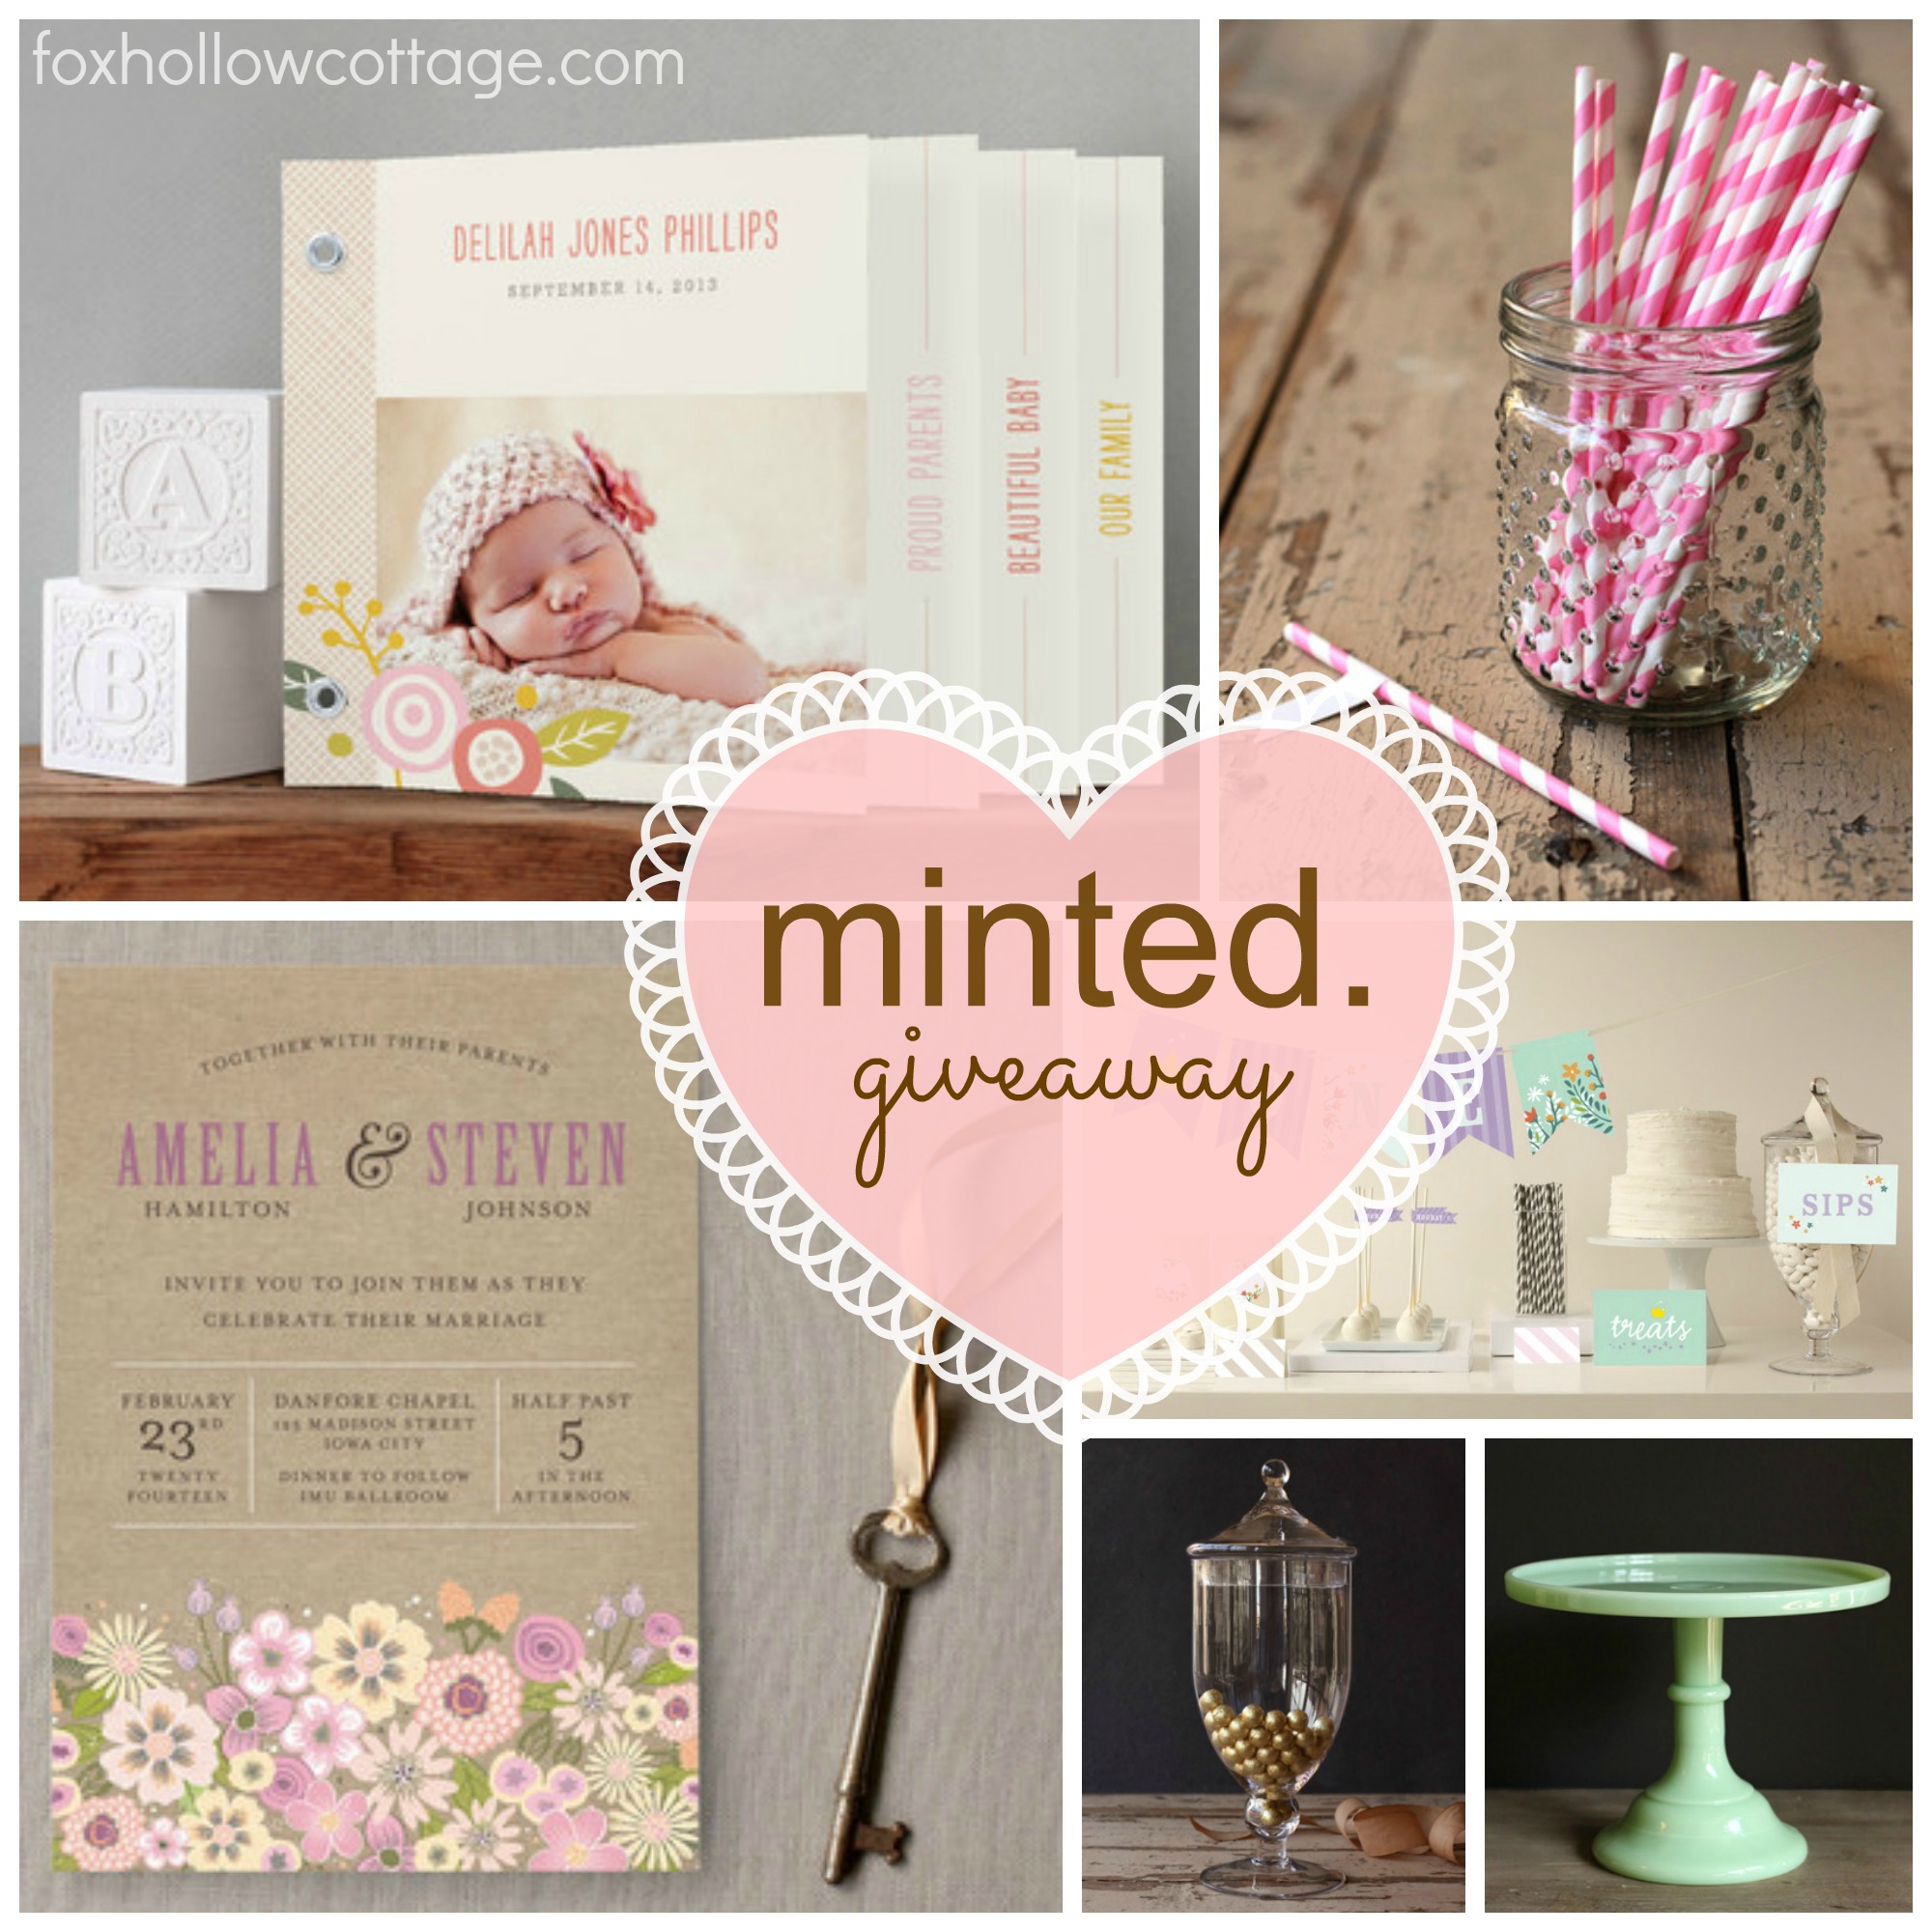 A Minted Giveaway pretty-perfect-paper - Fox Hollow Cottage